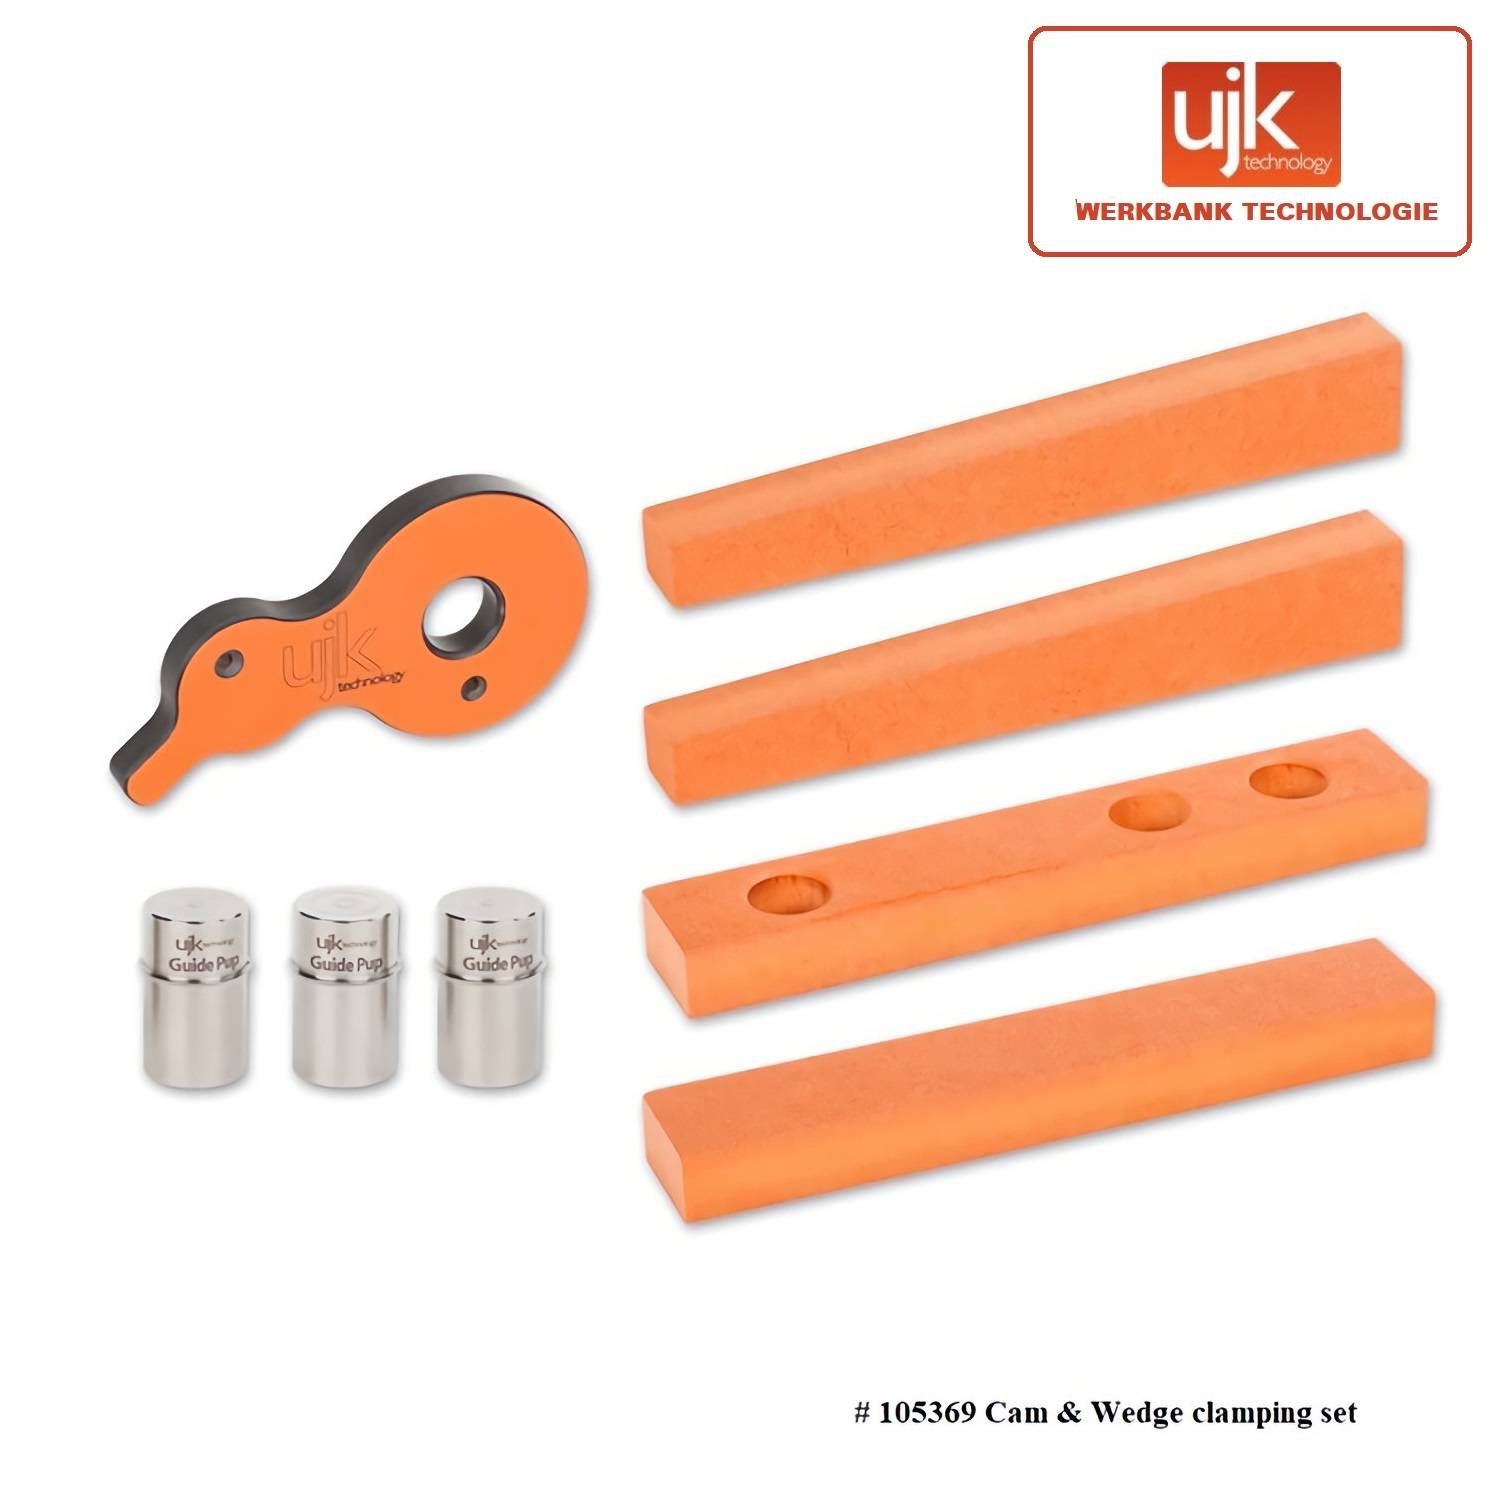 UJK_cam_and_wedge_clamping_set